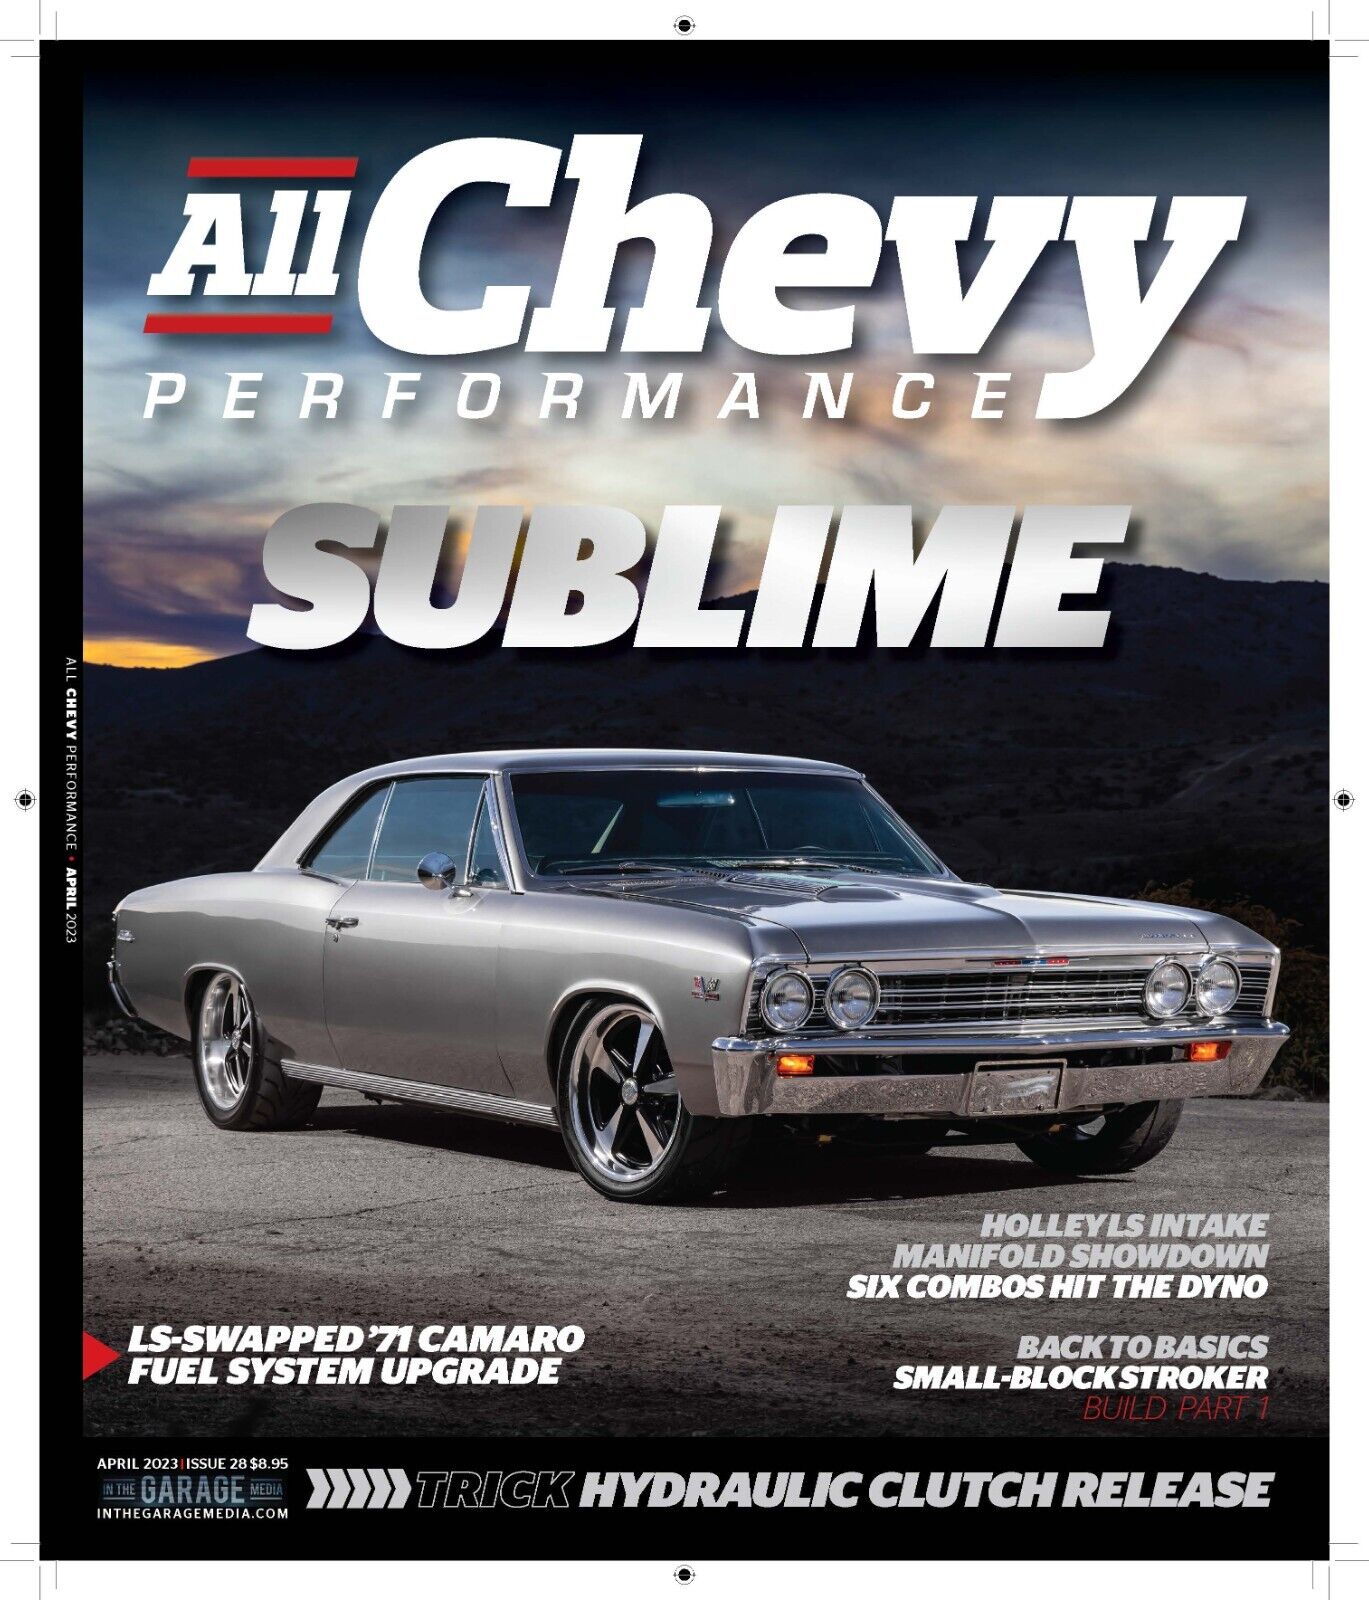 All Chevy Performance Magazine Issue #28 April 2023 - New